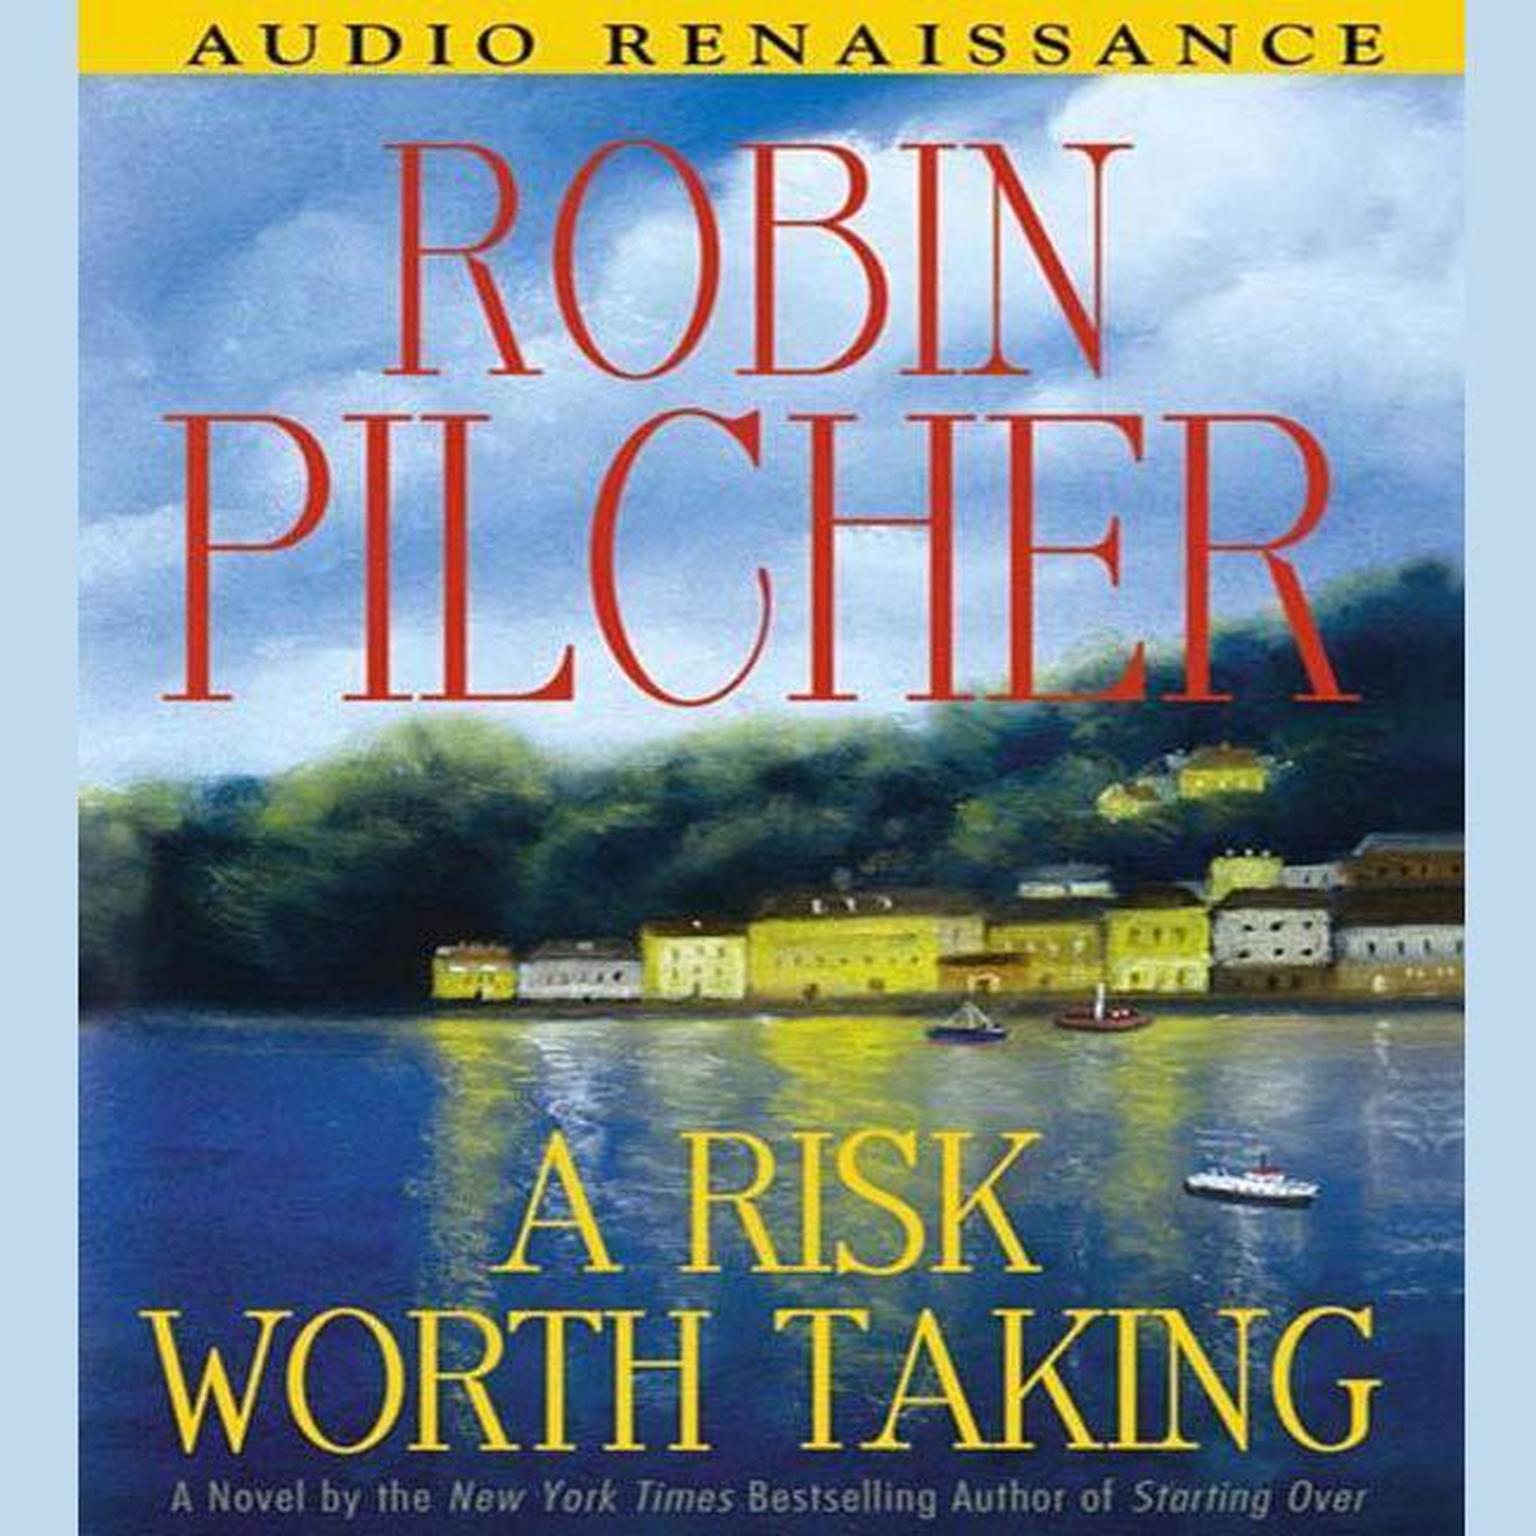 A Risk Worth Taking (Abridged) Audiobook, by Robin Pilcher